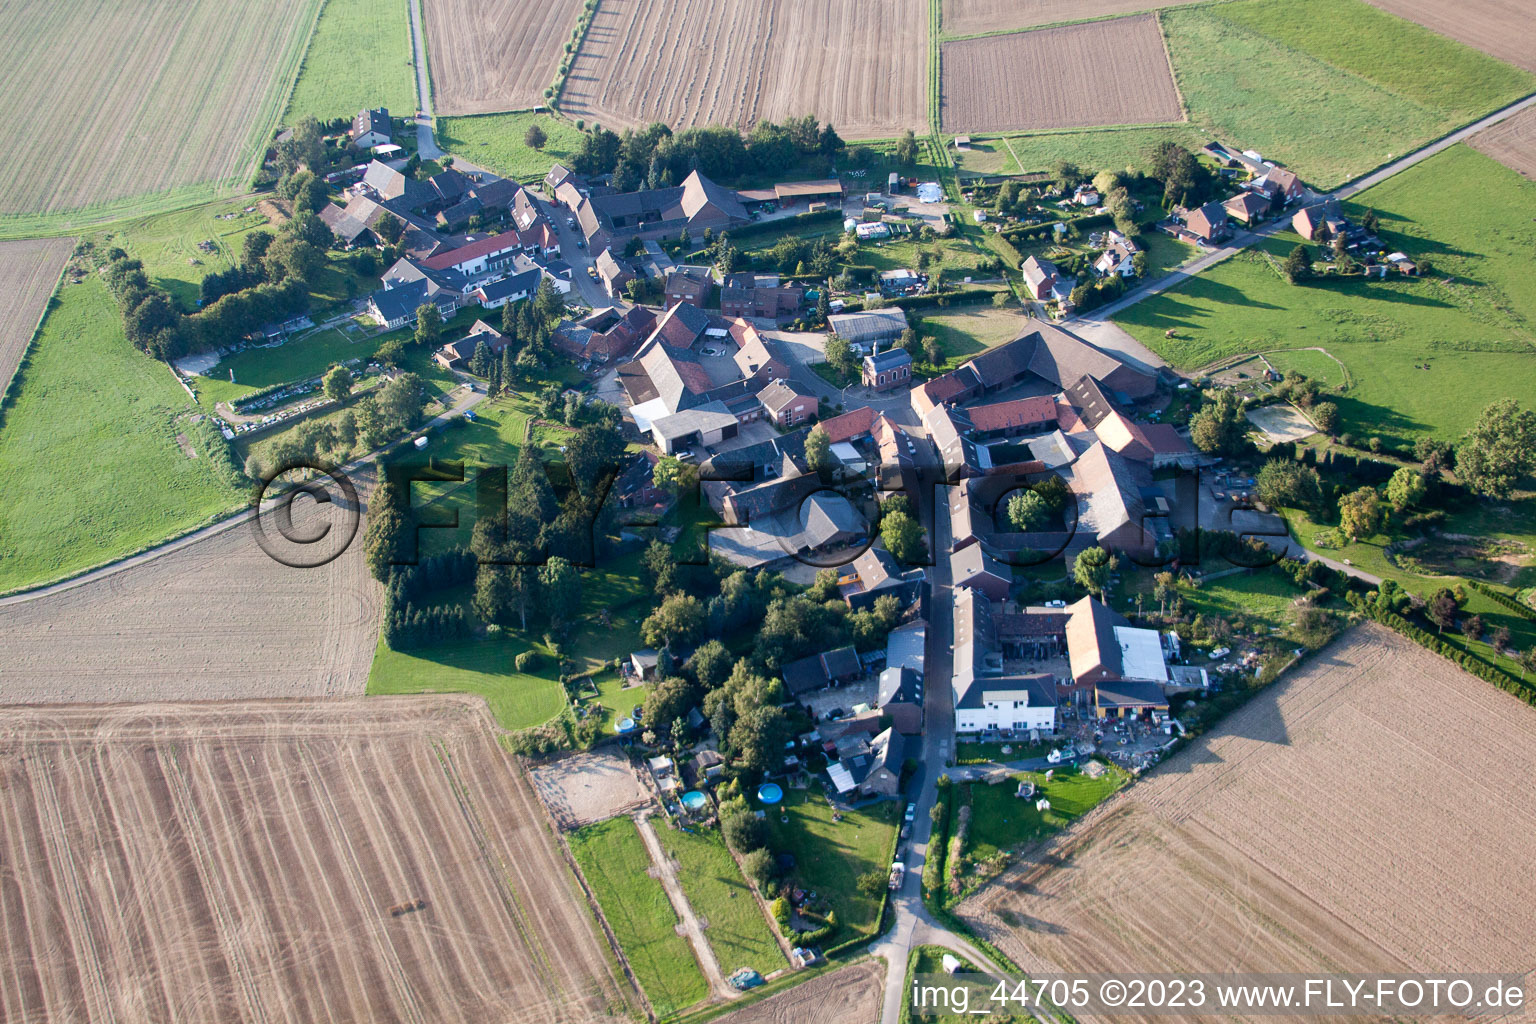 Erkelenz in the state North Rhine-Westphalia, Germany seen from above